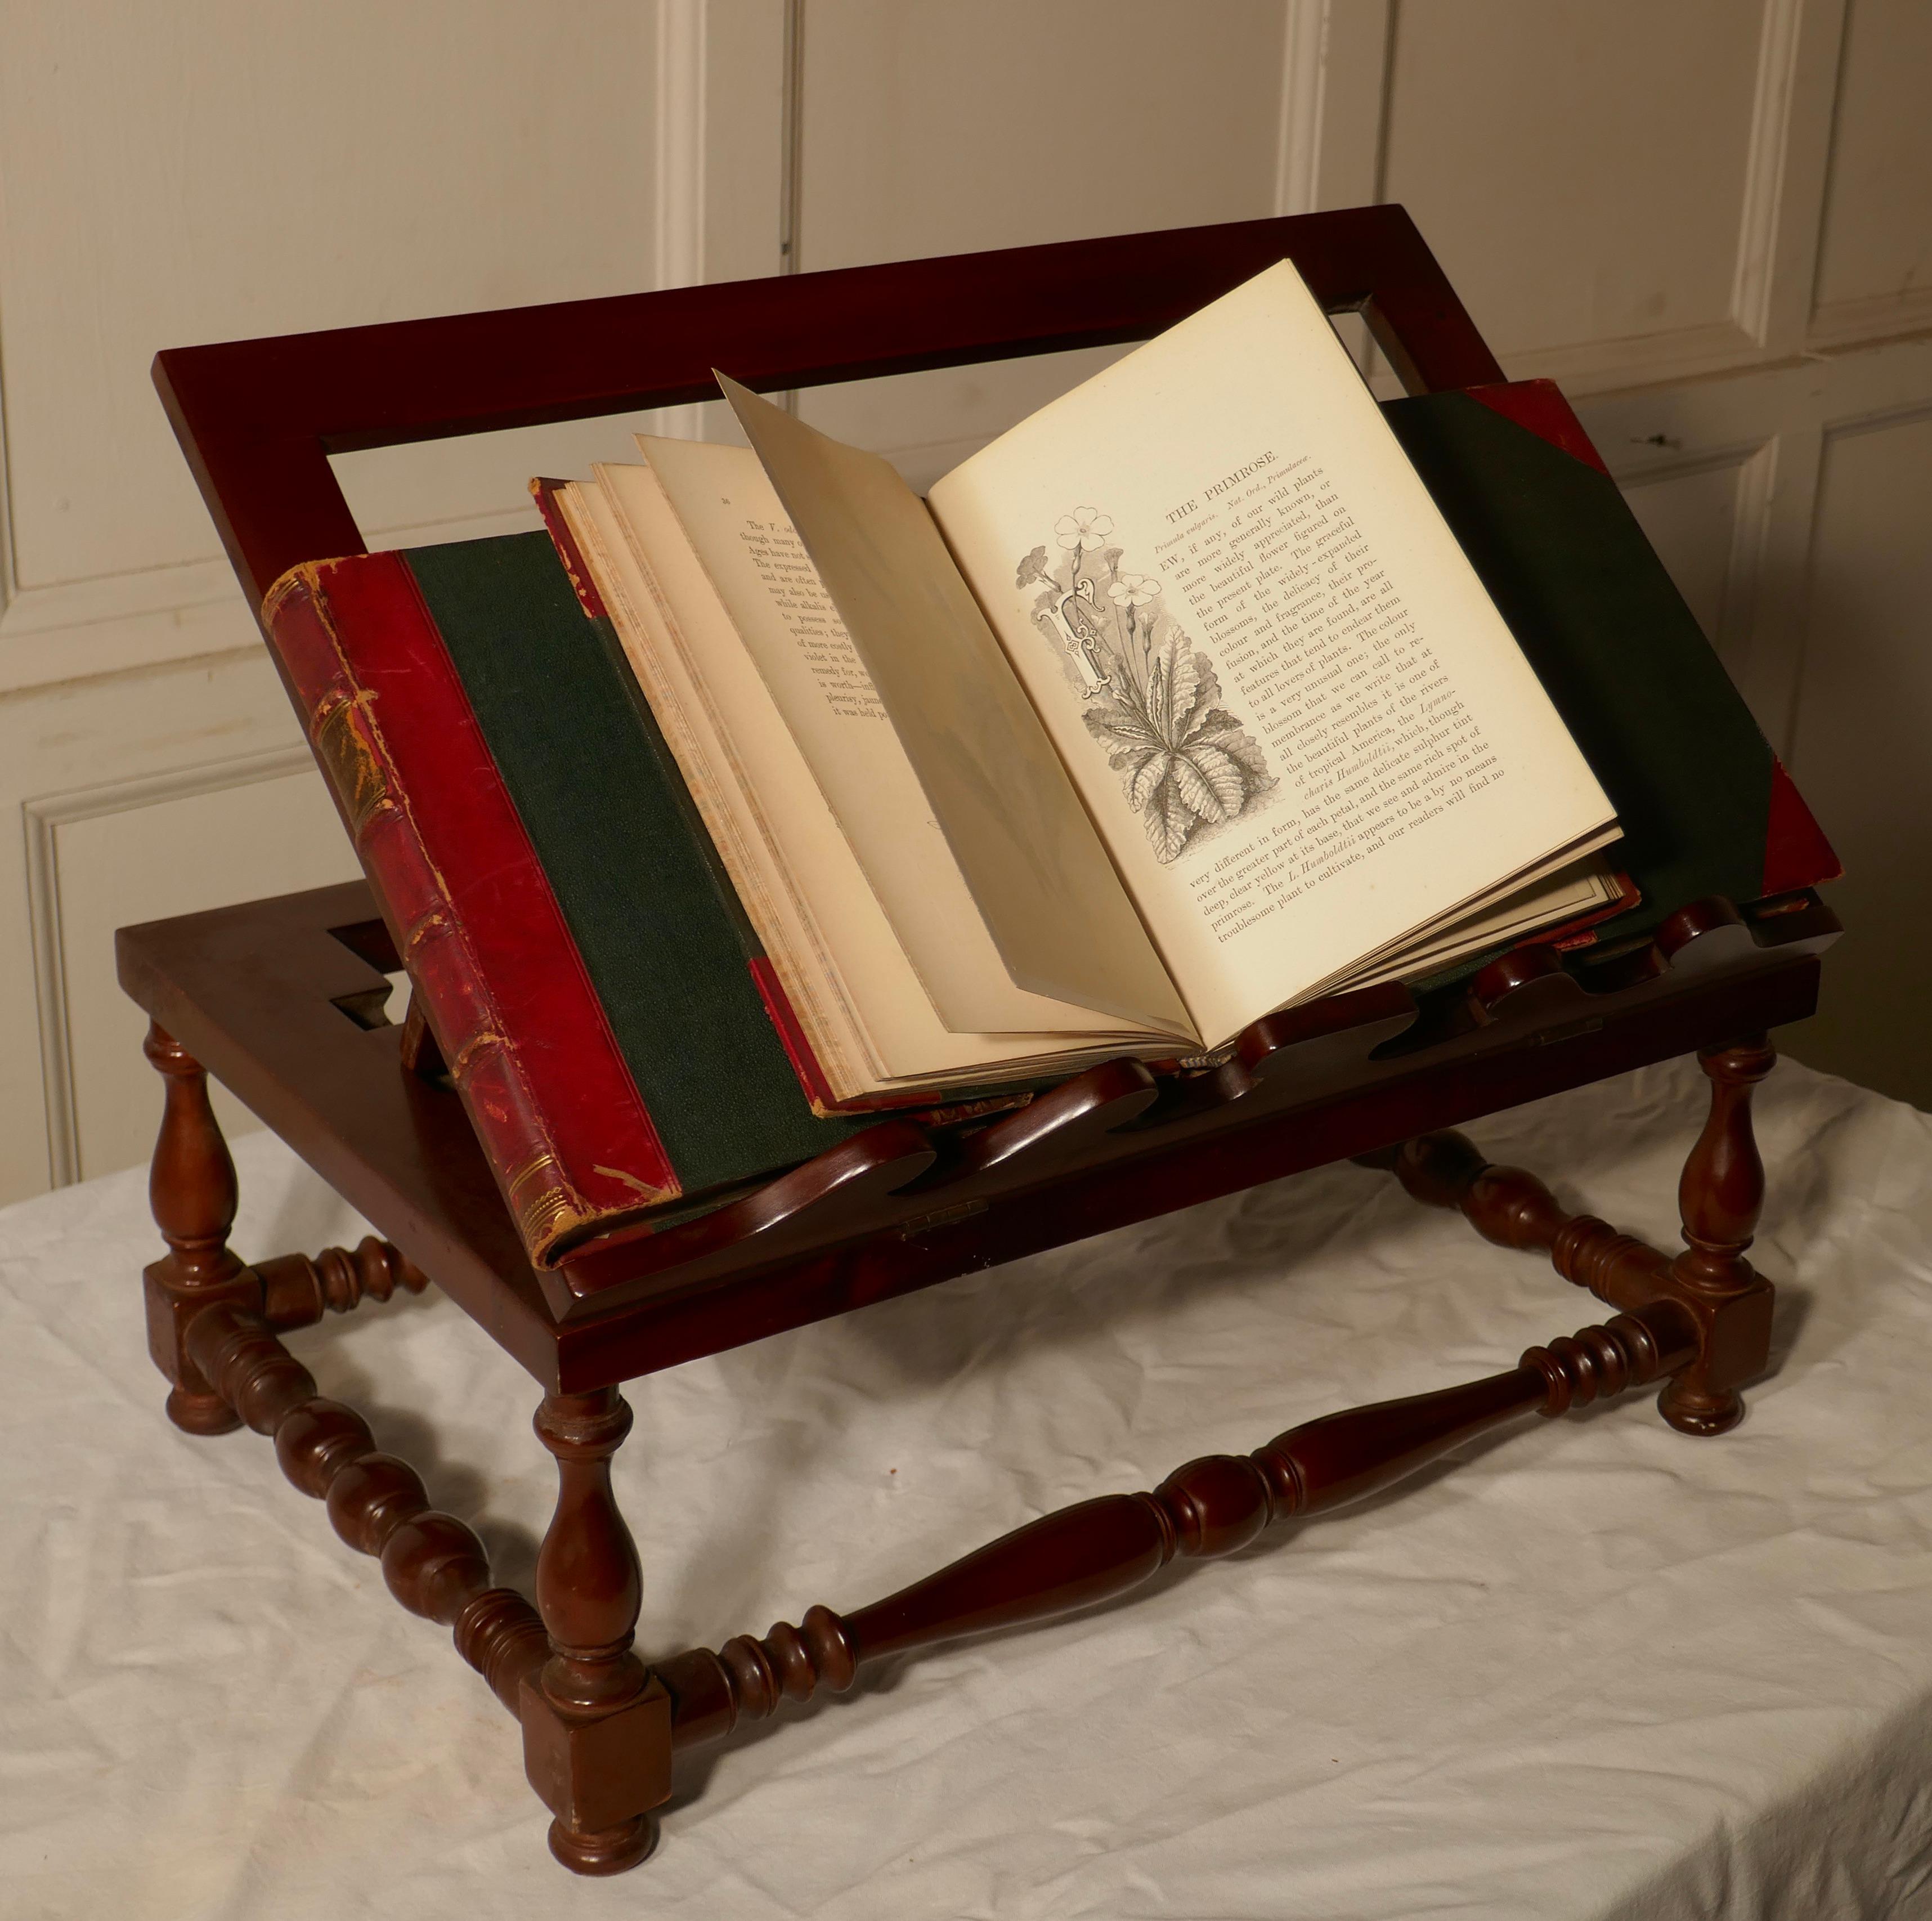 Book rest, reading or music stand

This is a charming piece, it is made in mahogany it has a superb and stabile design with several angle settings to suit your needs and page clips 

A charming piece and in good condition, not only would it be a